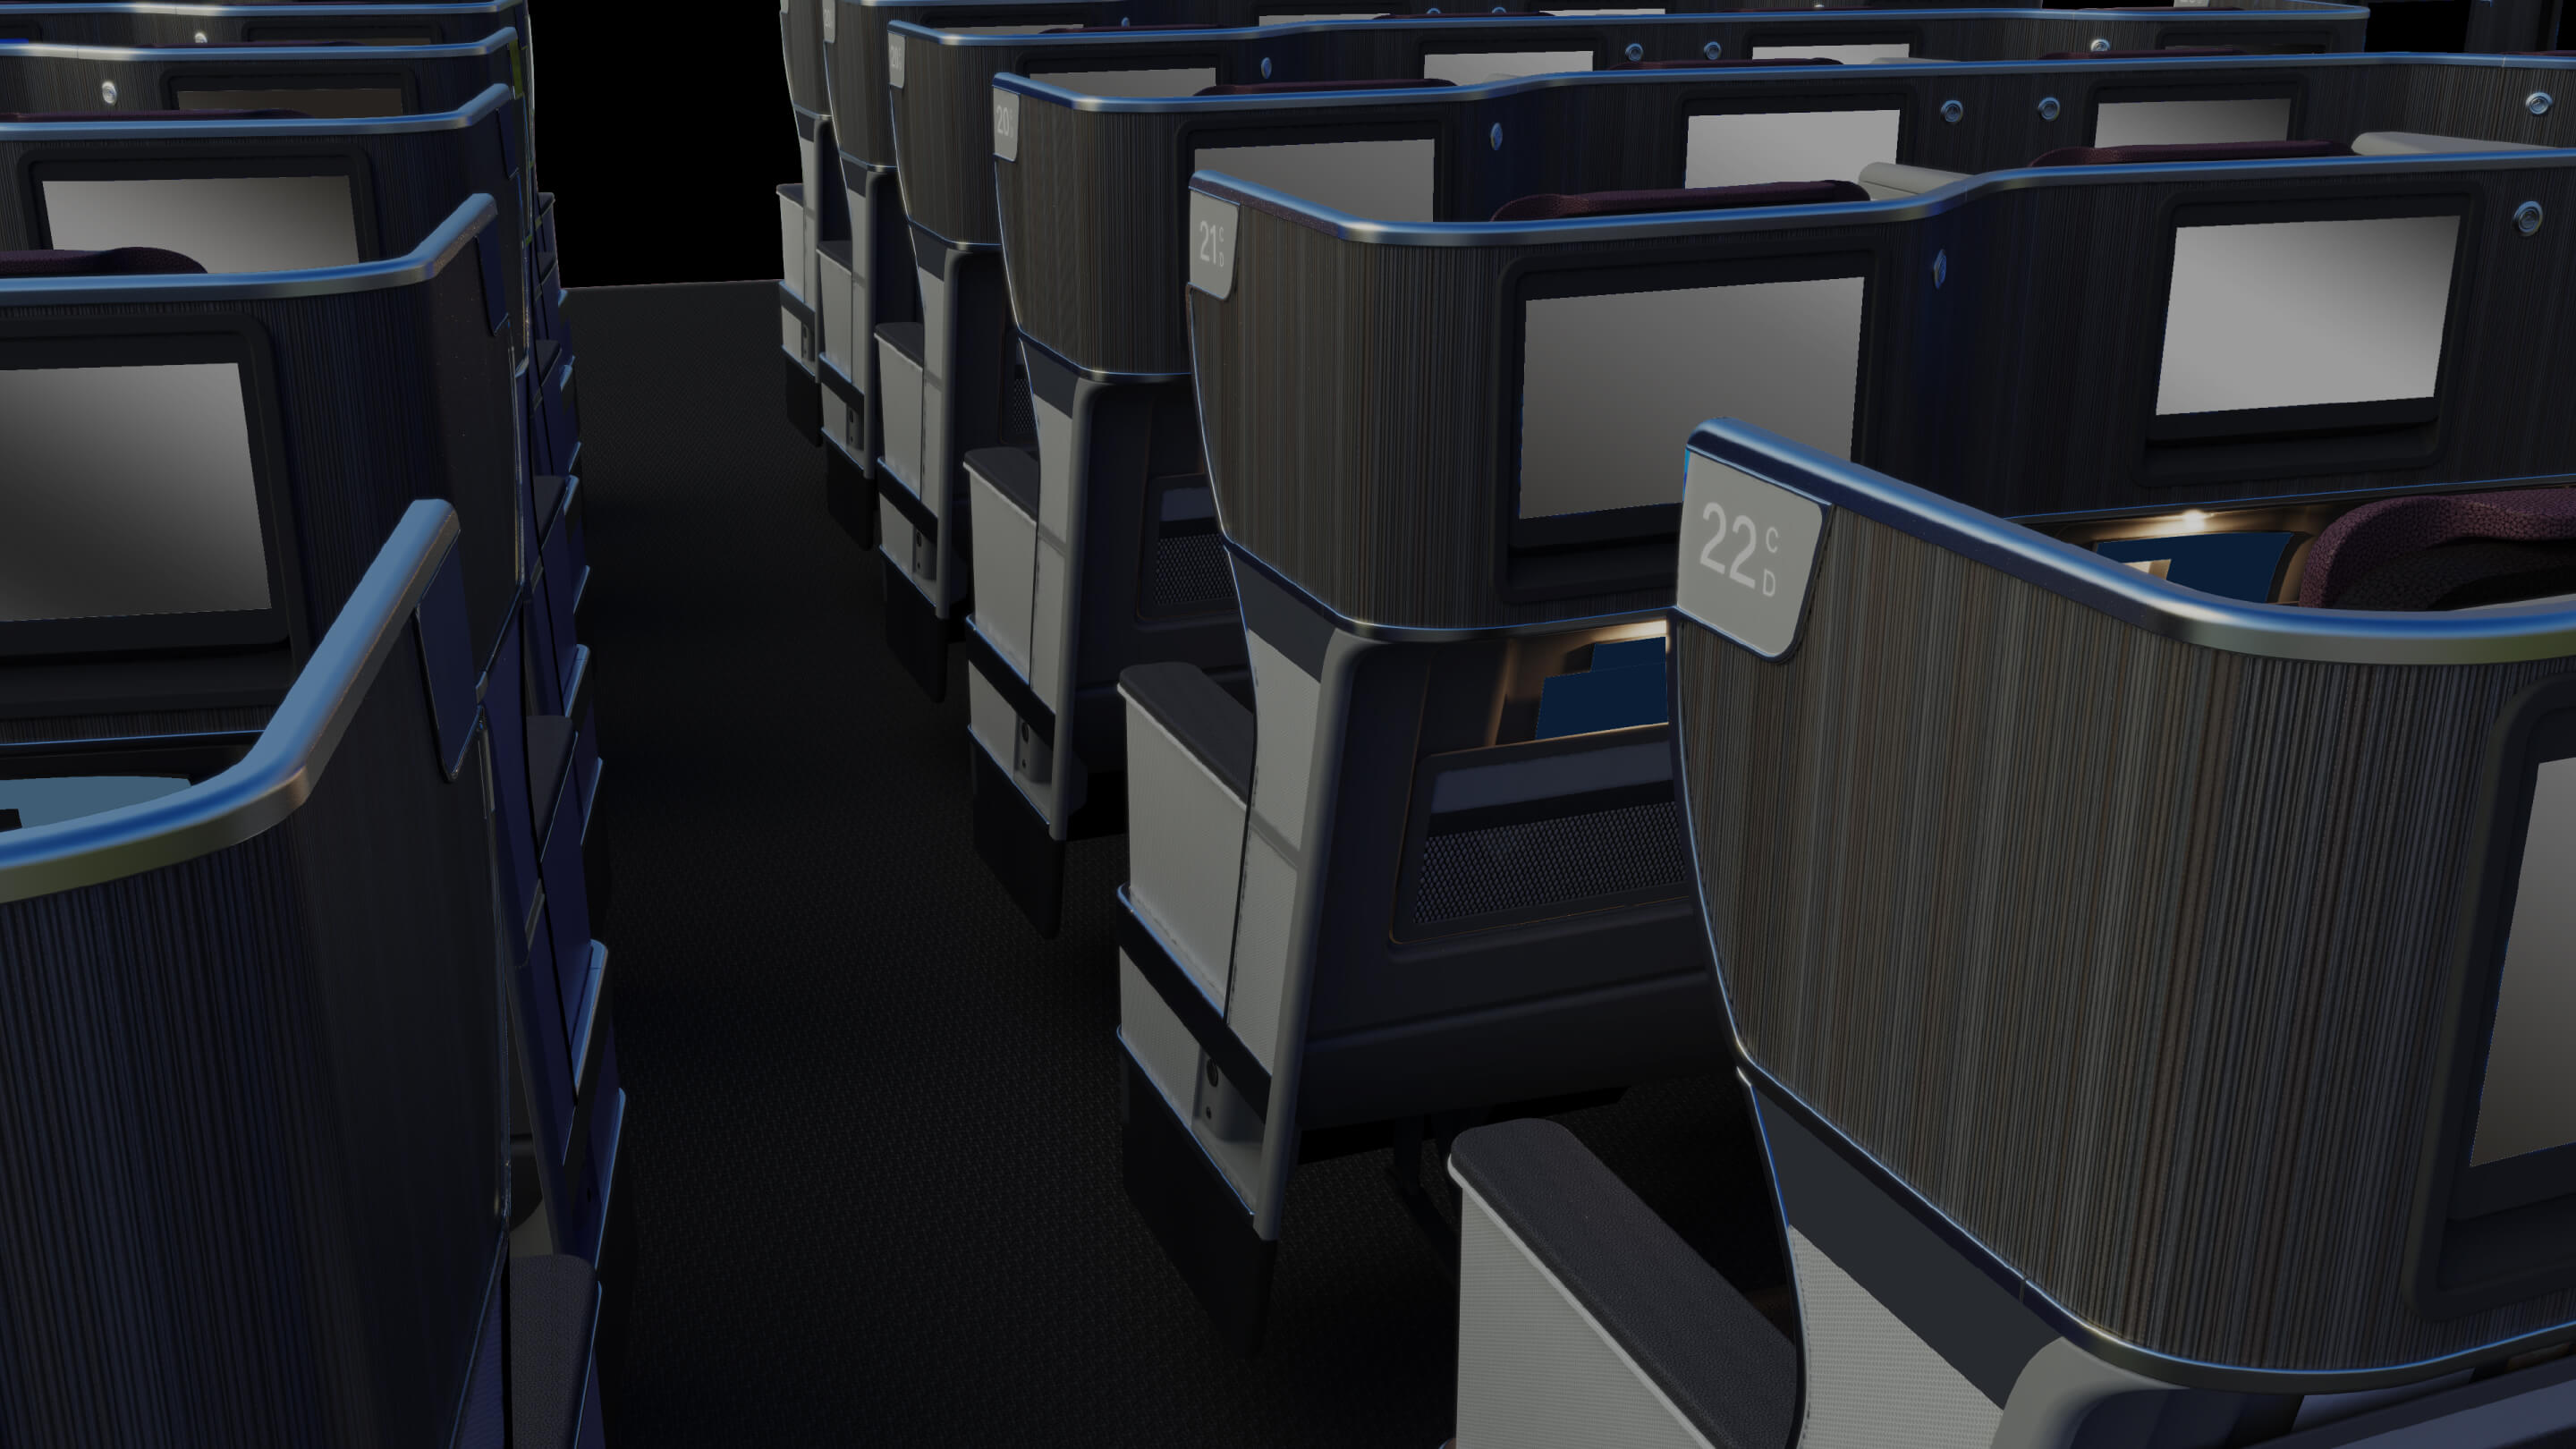 Eclipse Staggered seats inside aircraft cabin.